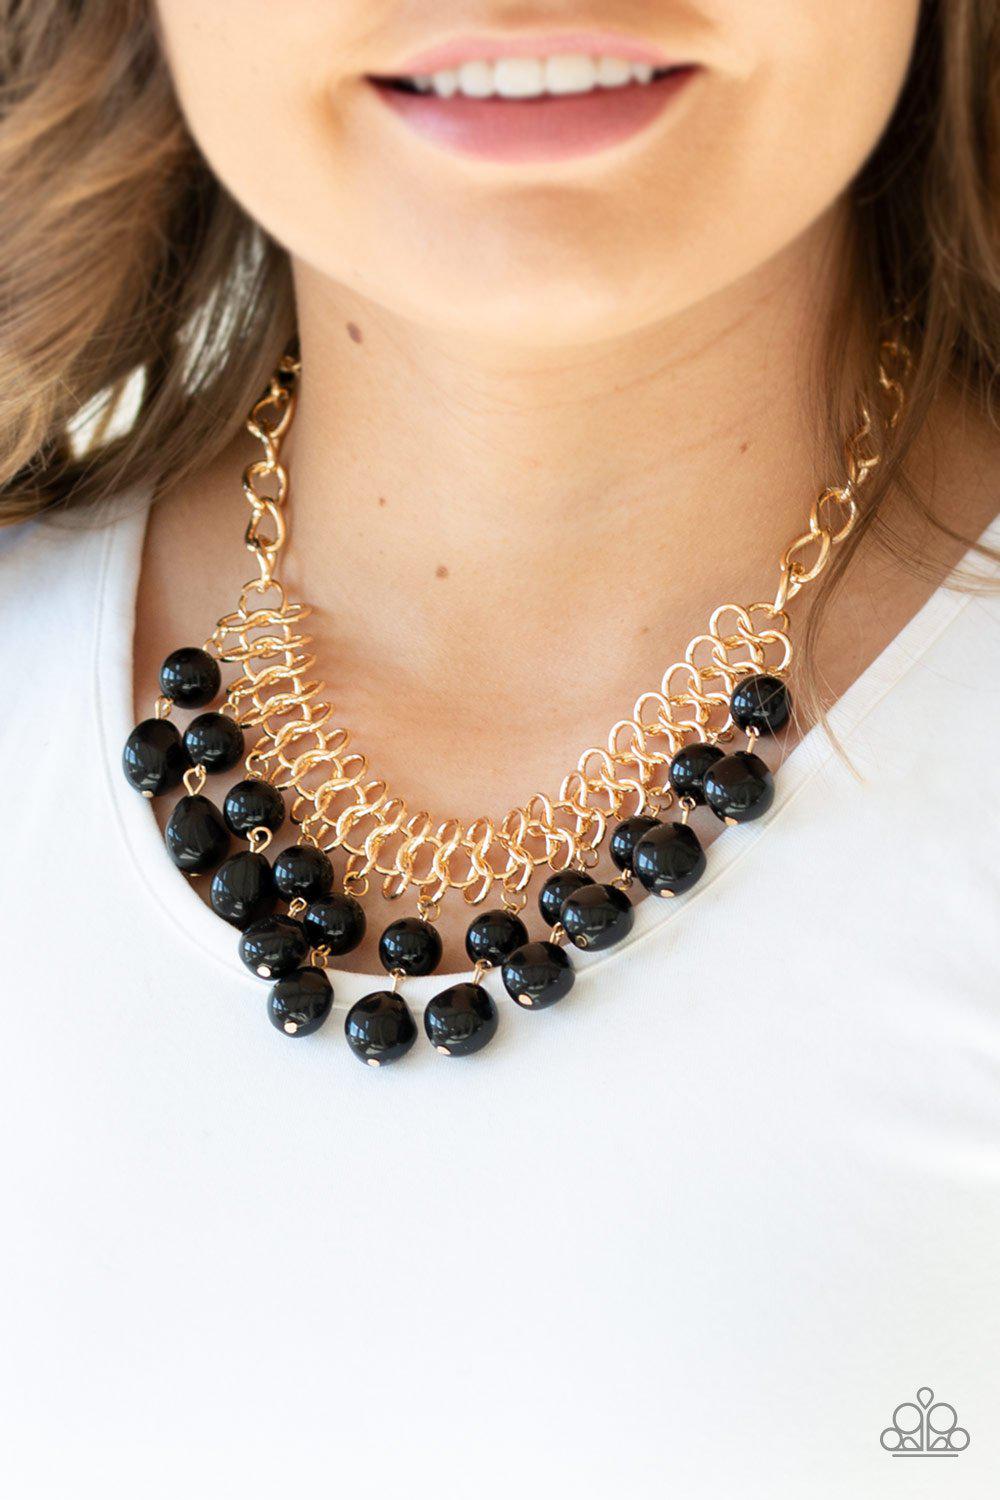 5th Avenue Fleek Black and Gold Necklace - Paparazzi Accessories - model -CarasShop.com - $5 Jewelry by Cara Jewels